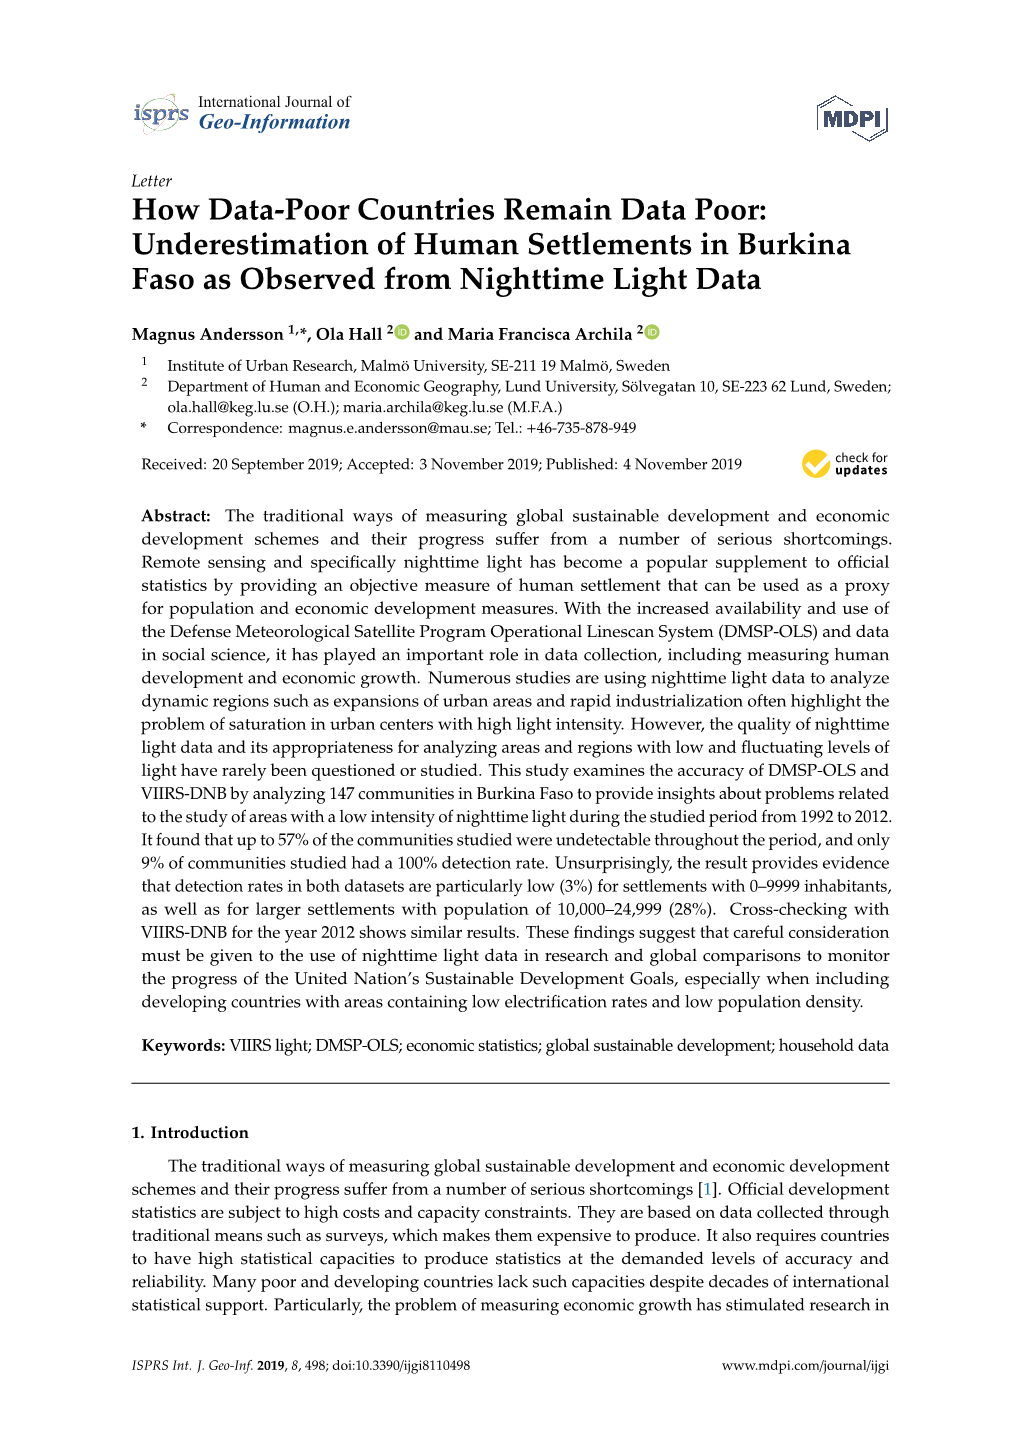 Underestimation of Human Settlements in Burkina Faso As Observed from Nighttime Light Data